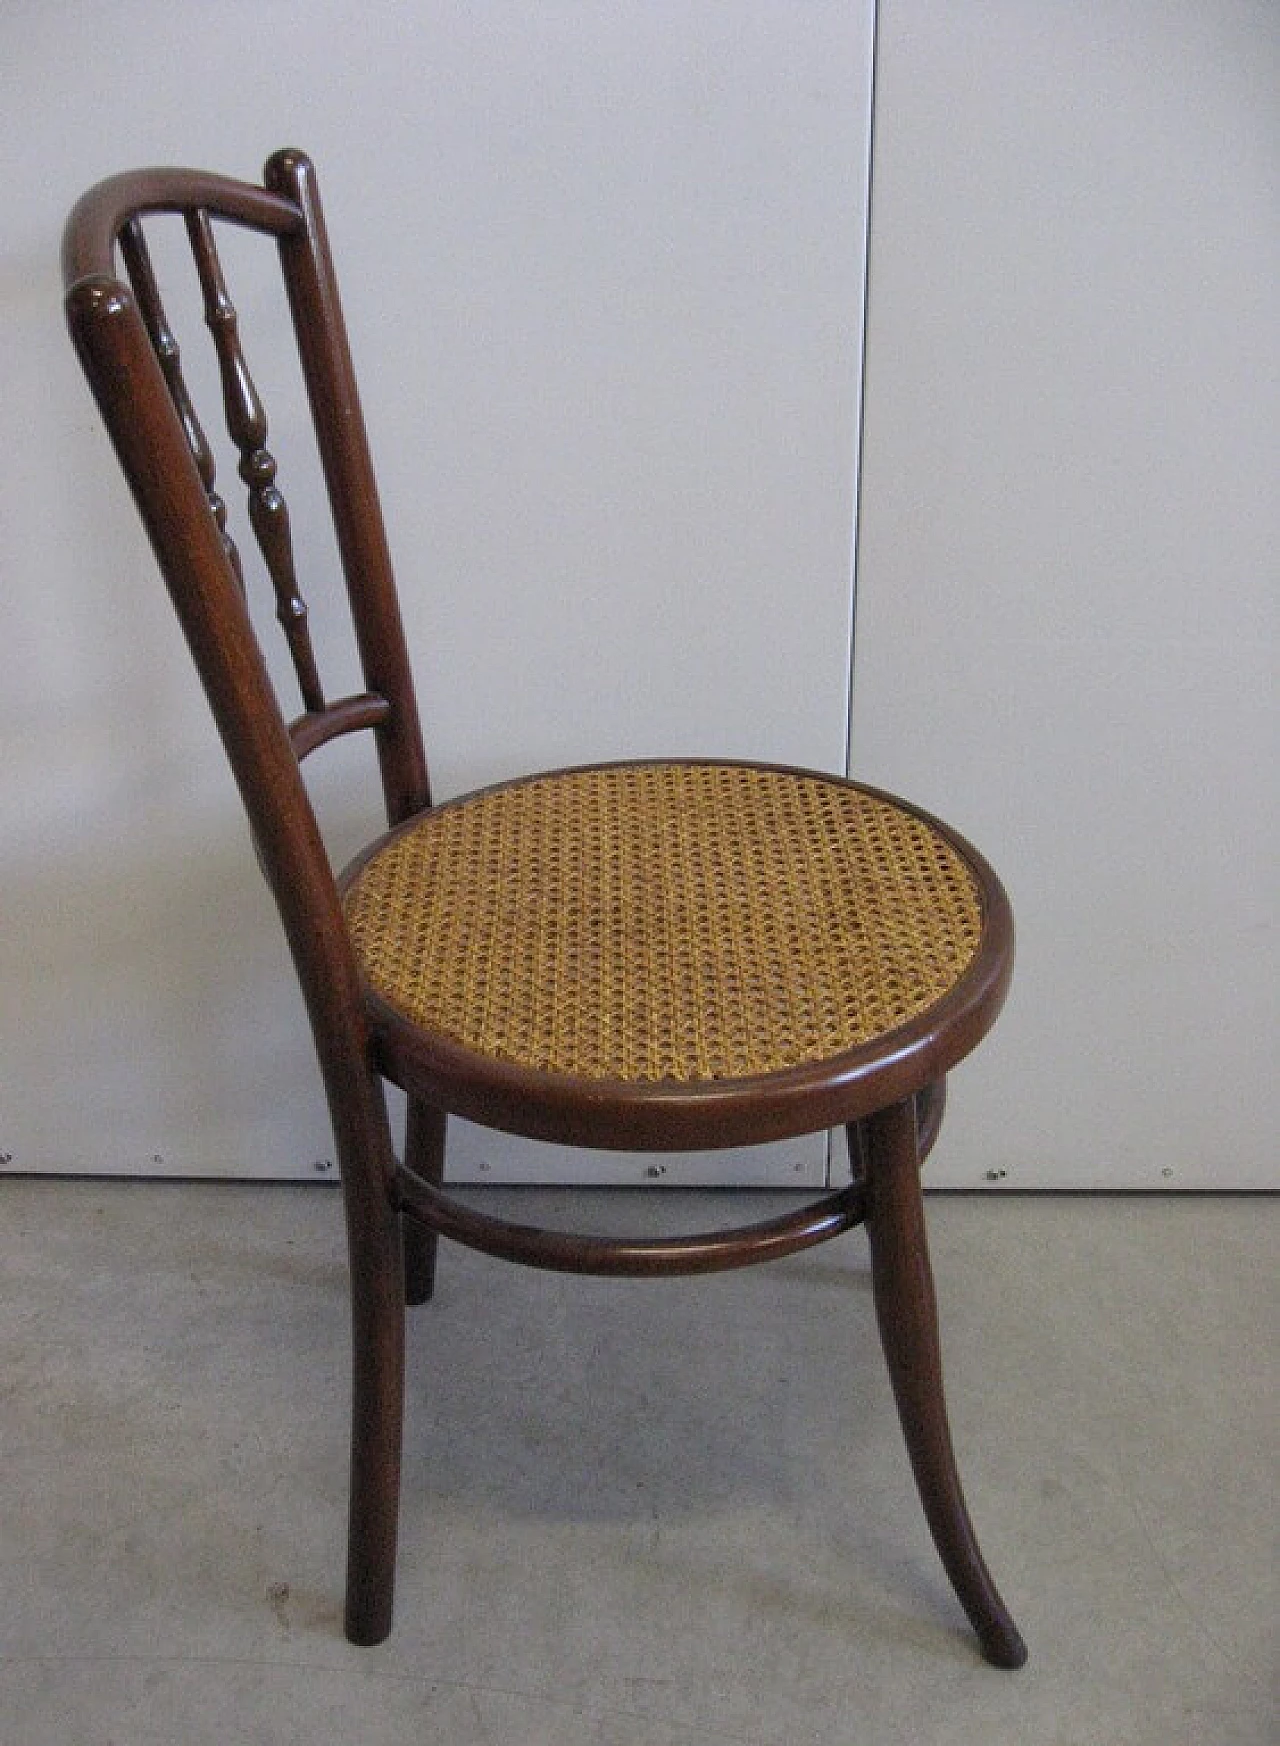 Series of 4 chairs marked with the brand J & J Kohn Wien Austria, beginning 20th century 1324143